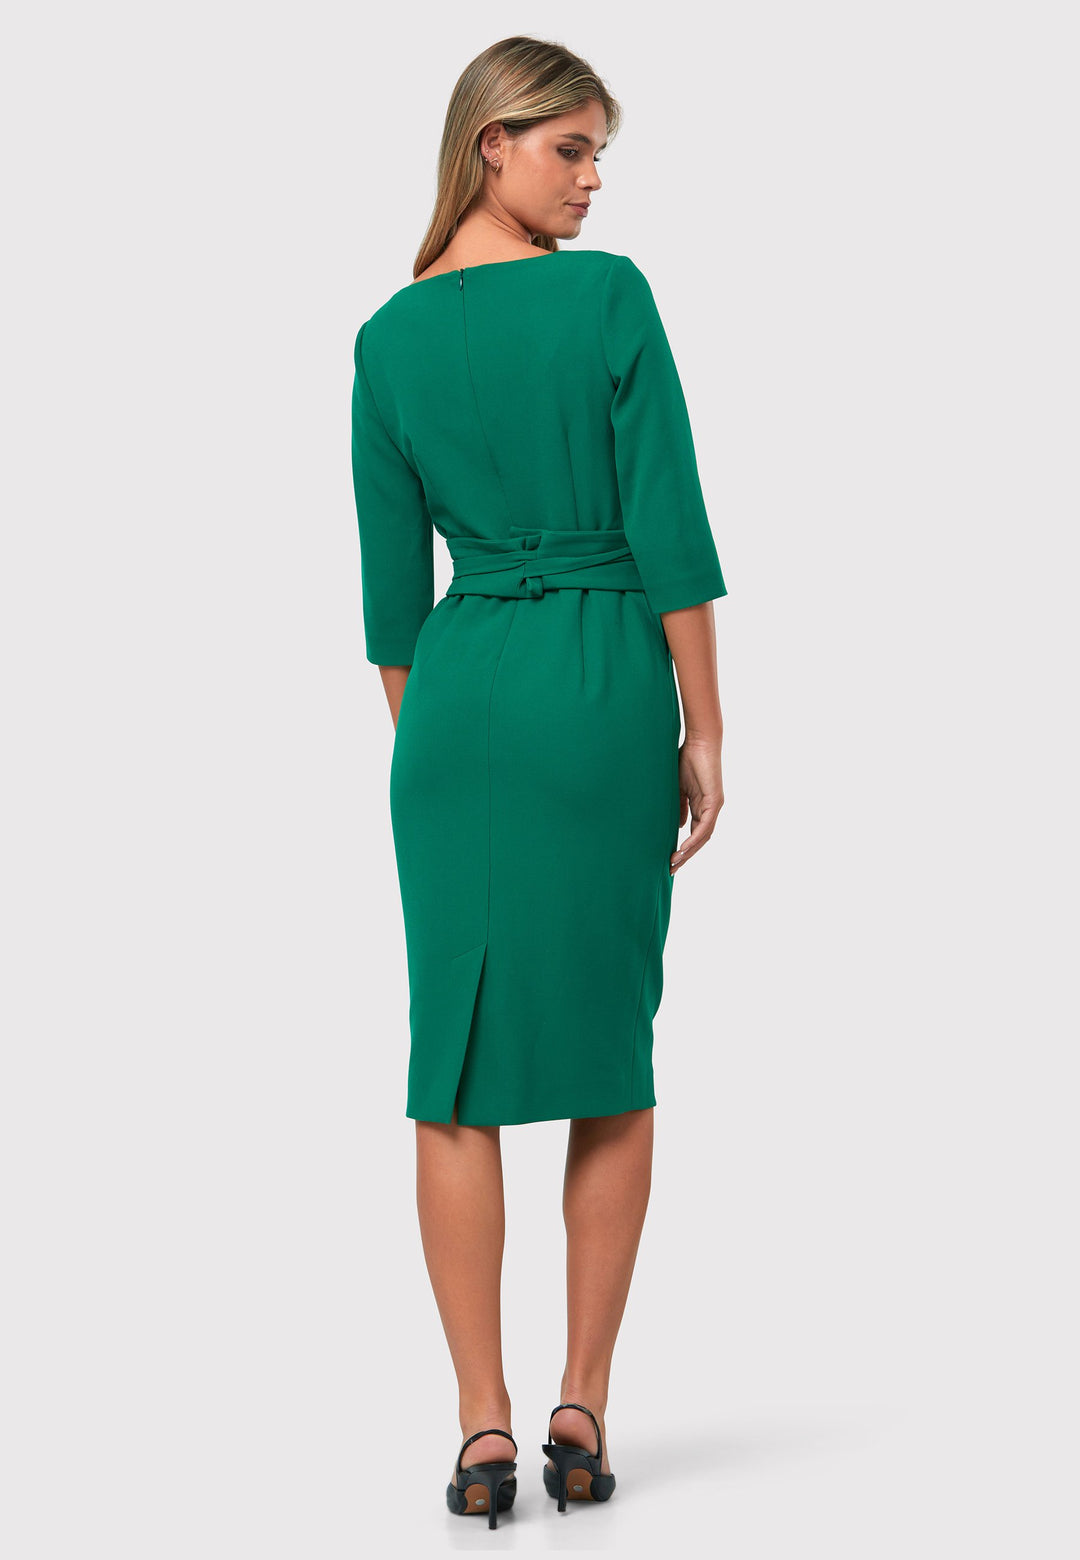 Introducing the Ophelia Dark Emerald Green Dress, a timeless and impeccably tailored silhouette. This expertly crafted dress features a form-flattering design with convenient pockets, a detachable belt, and a pencil skirt that falls to a chic mid-calf length. The sophisticated V-neckline adds an elegant touch to the overall look. Crafted from sustainably sourced fibers with a hint of stretch, this dress ensures both comfort and ease of movement. 